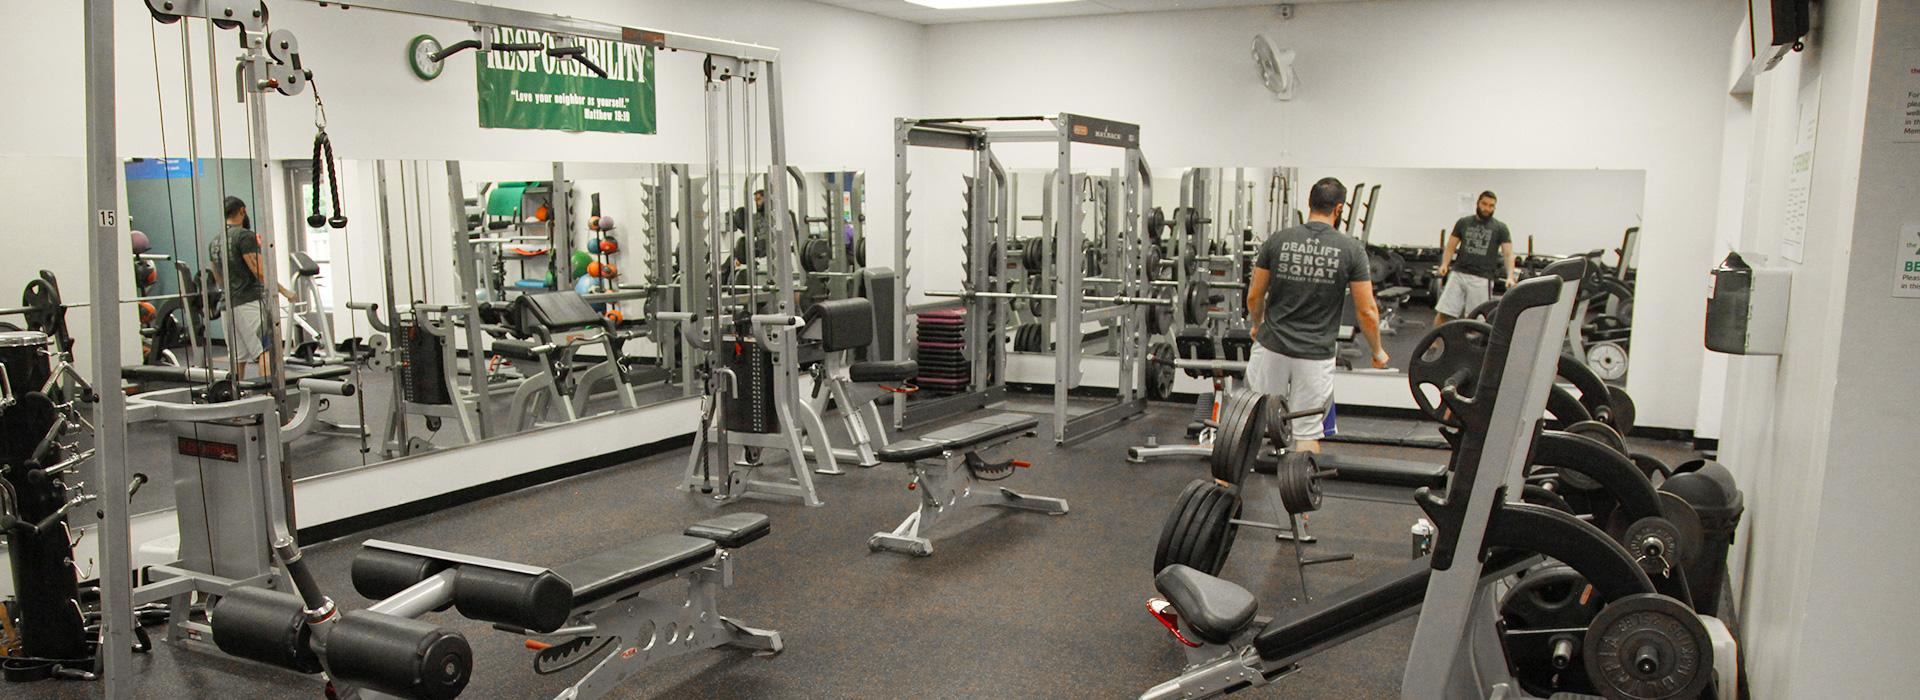 Greenbrier North Family YMCA fitness room